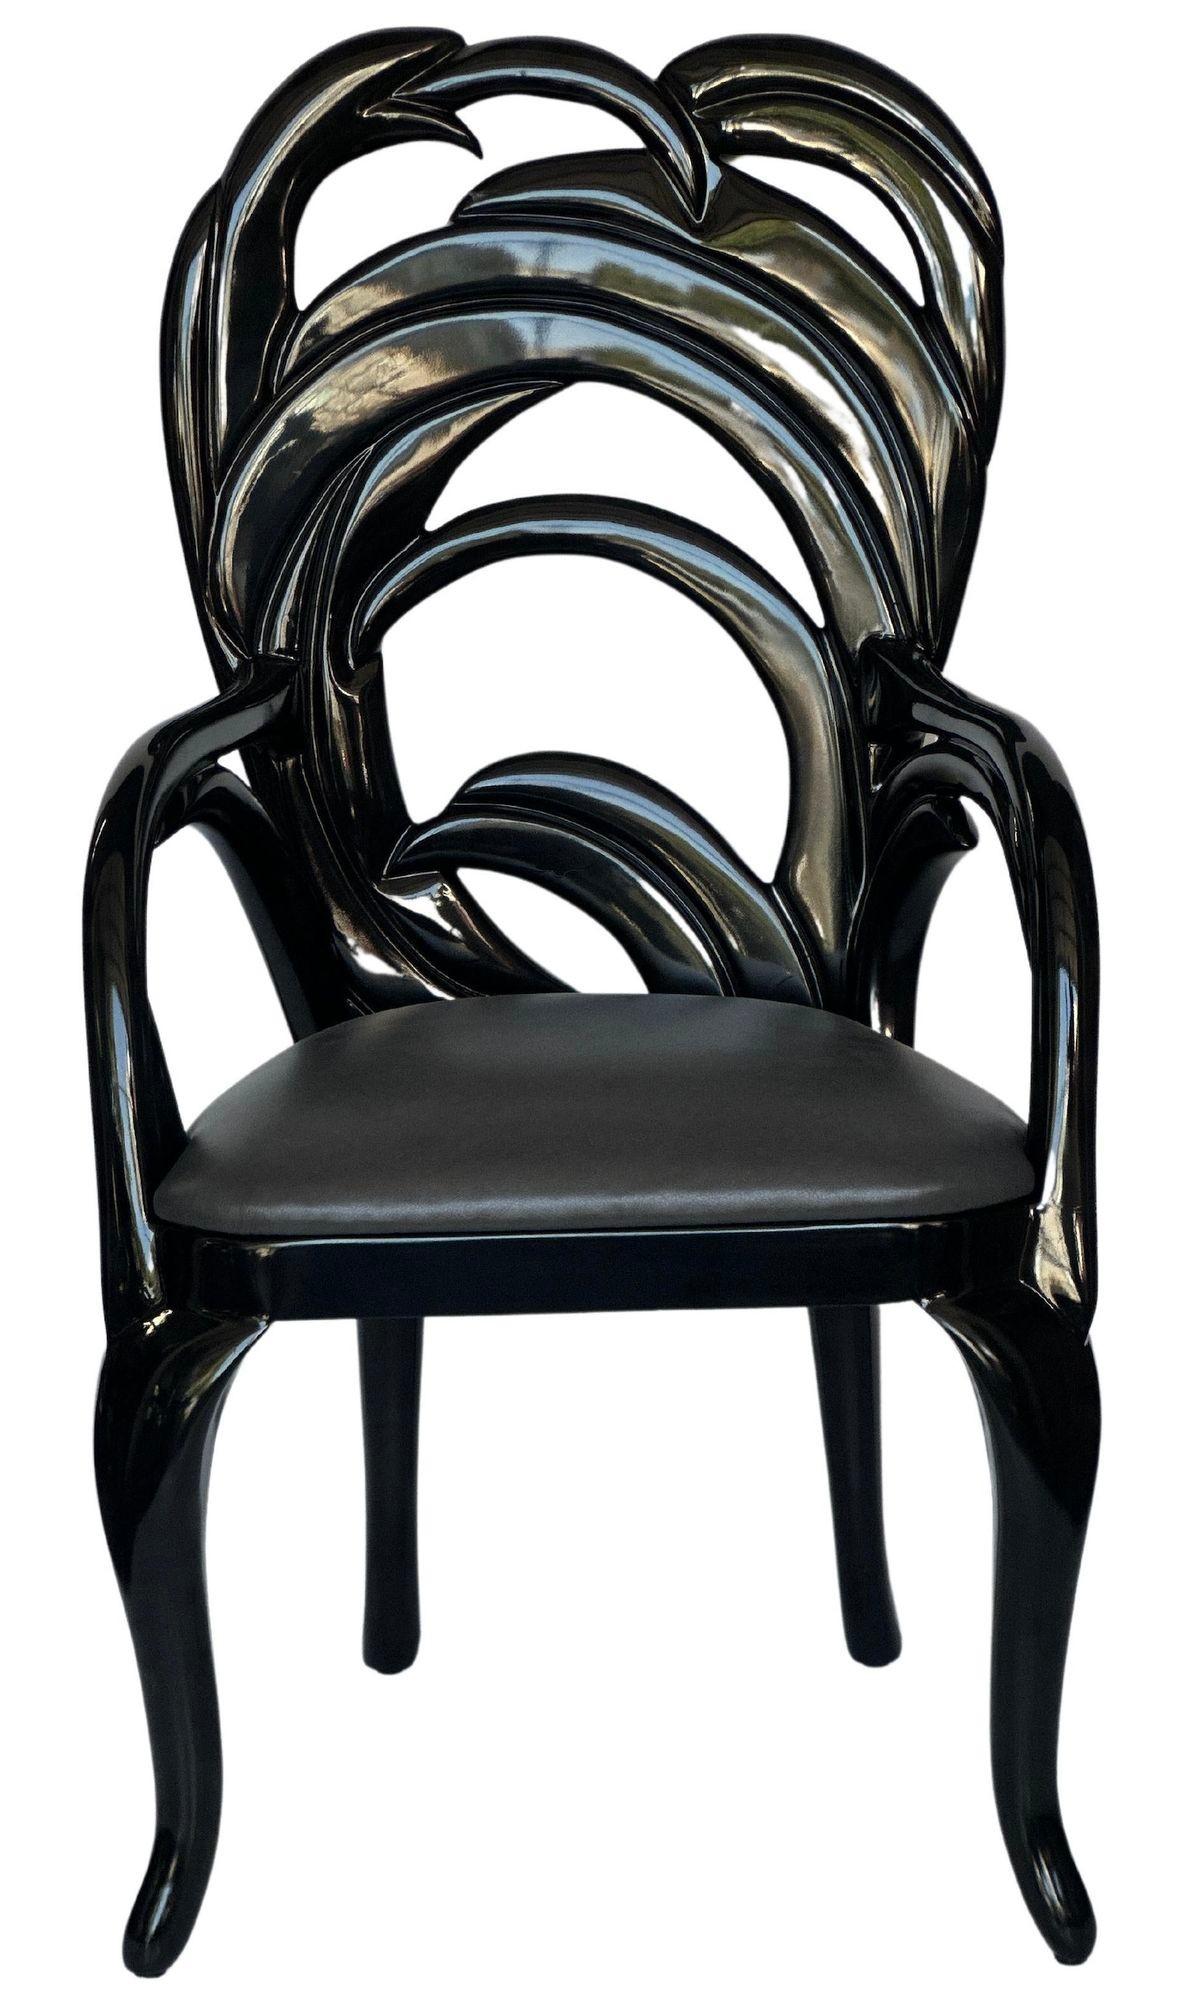 Set of ten vintage carved with fine wood, each lacquered with a glossy black tone and with a black leather upholstered cushion. The use of black lacquer not only adds a touch of sophistication but also provides a sleek, glossy finish that